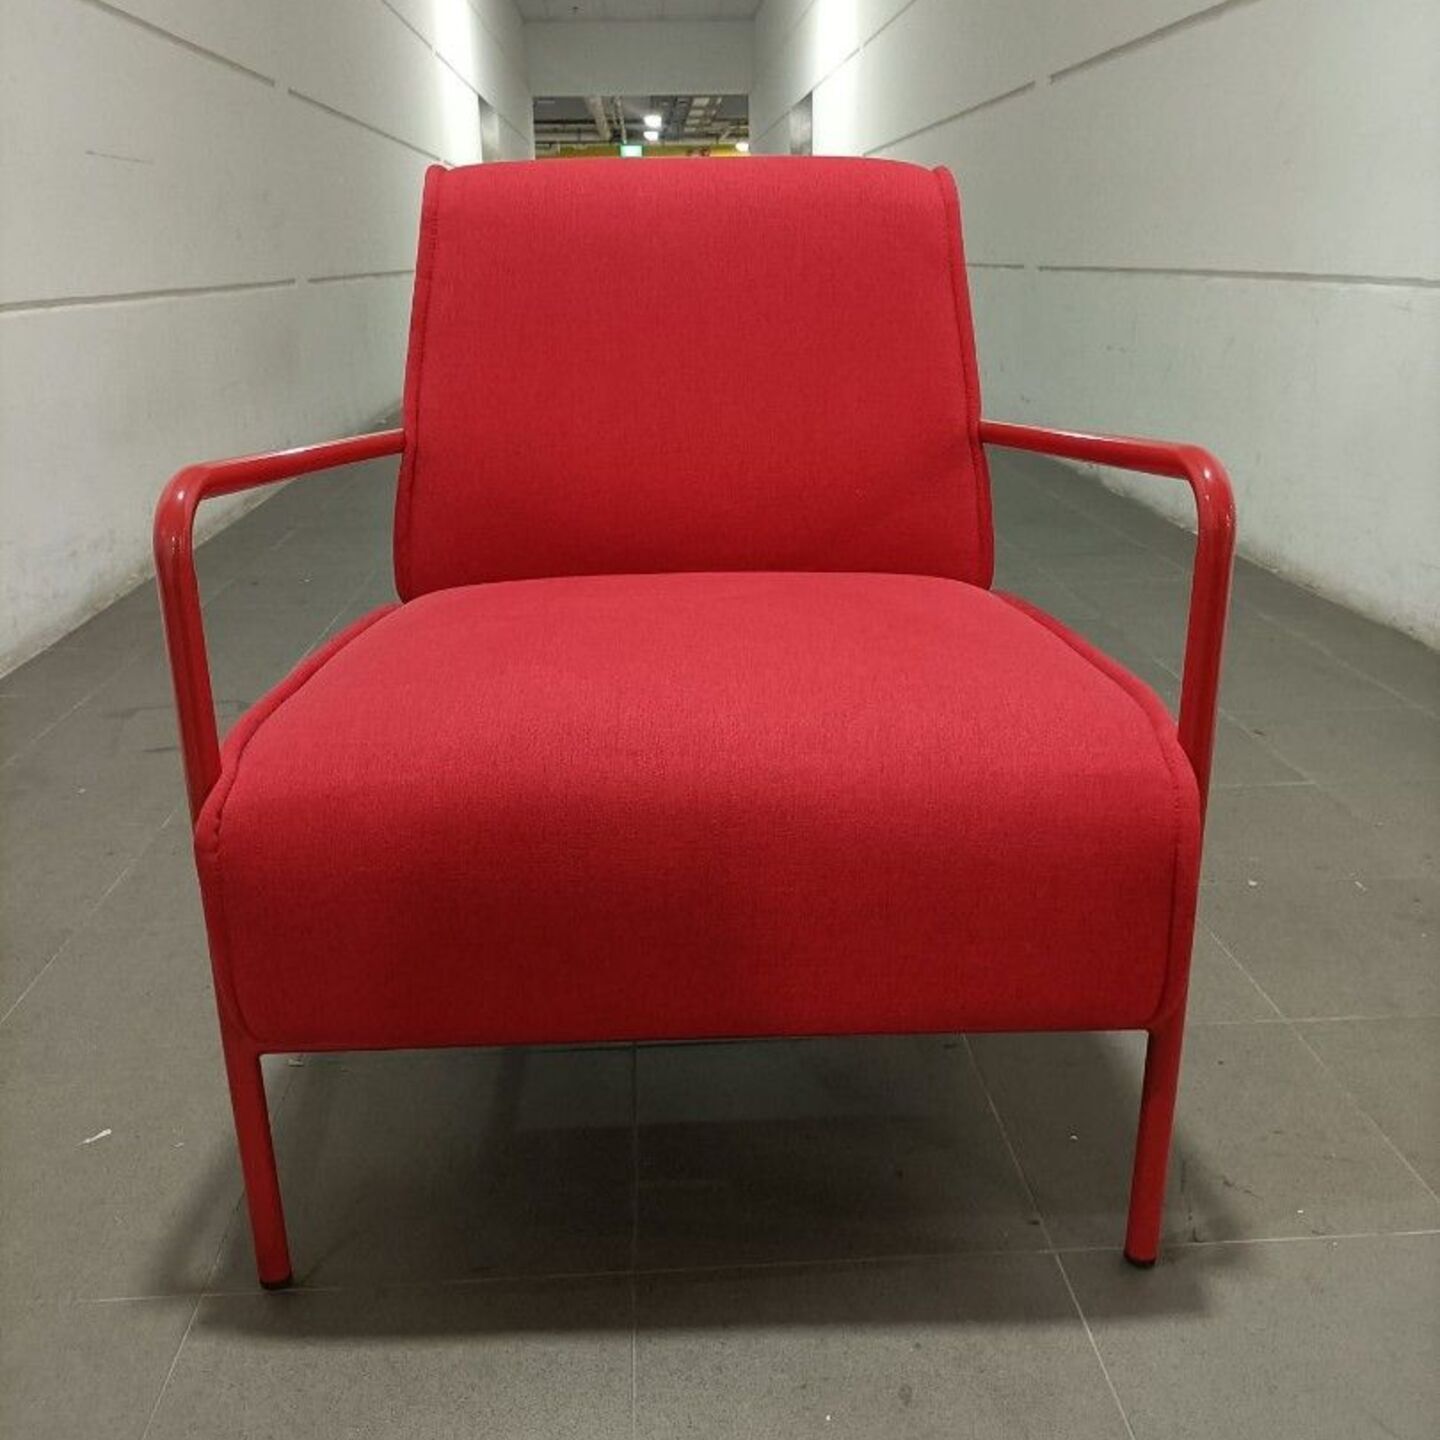 KANE Armchair in RED with Red Metal Frame